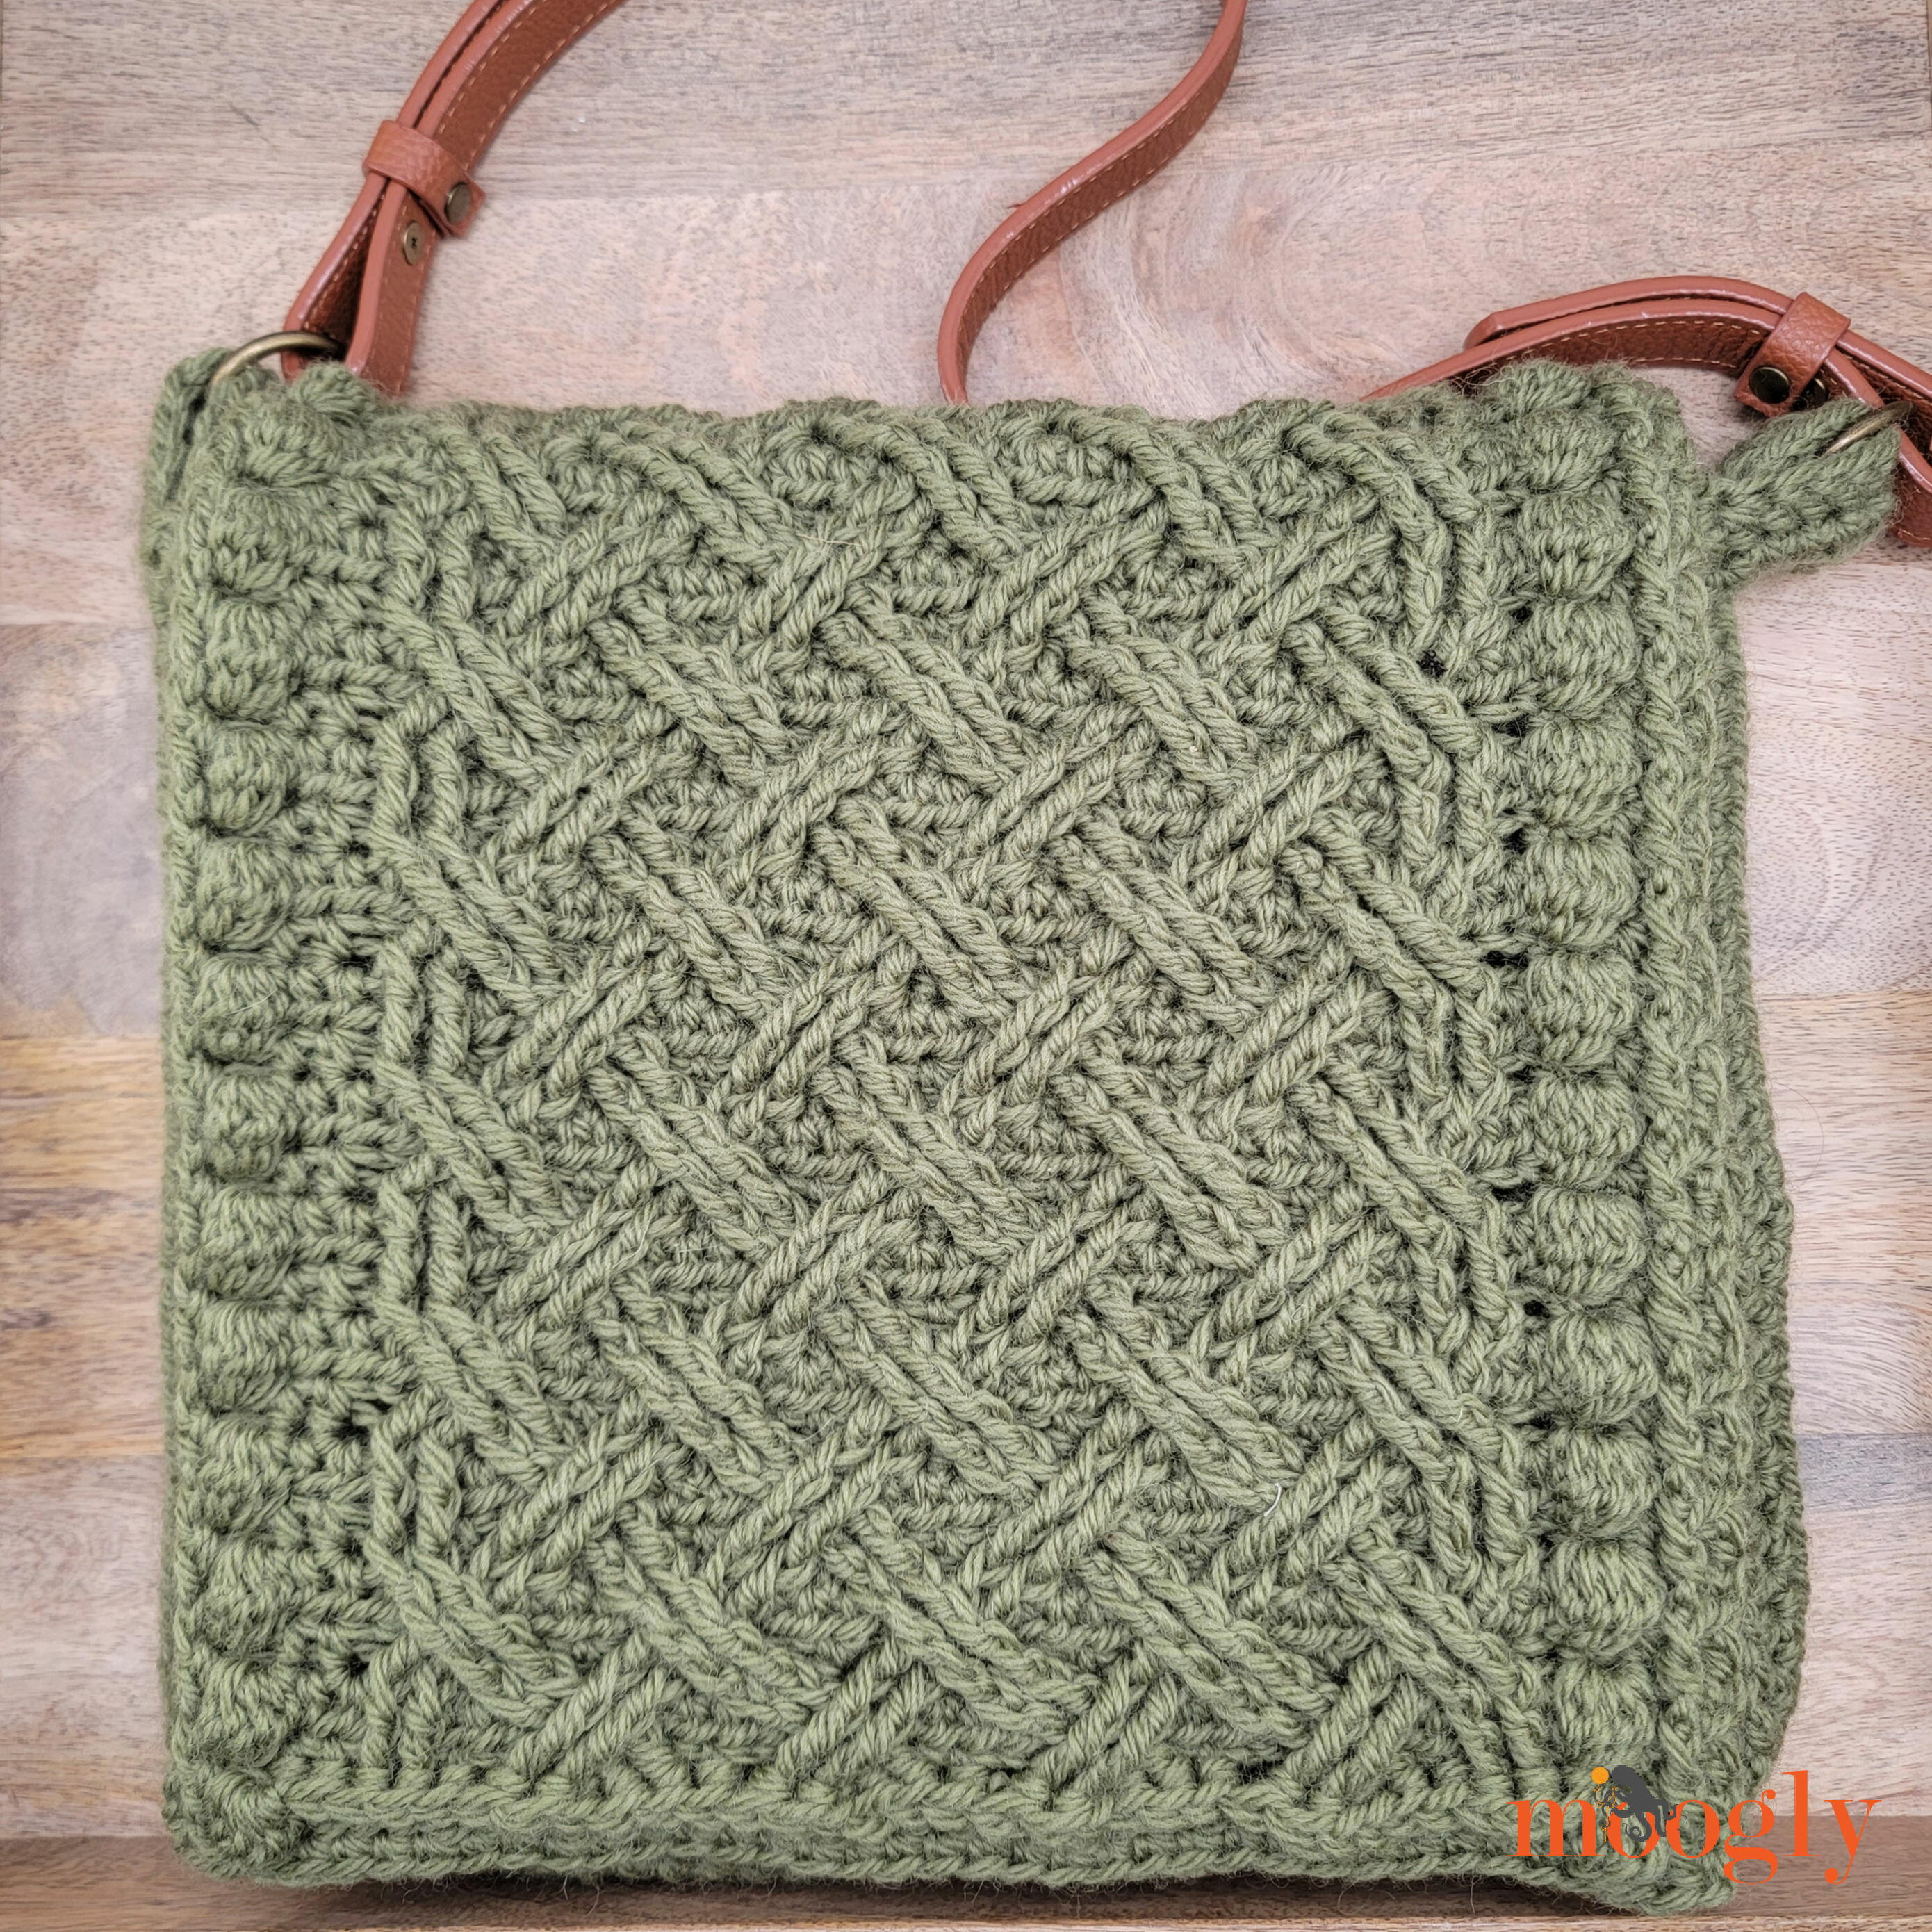 Carry It All with 10 Free Crochet Tote Bag Patterns! - moogly